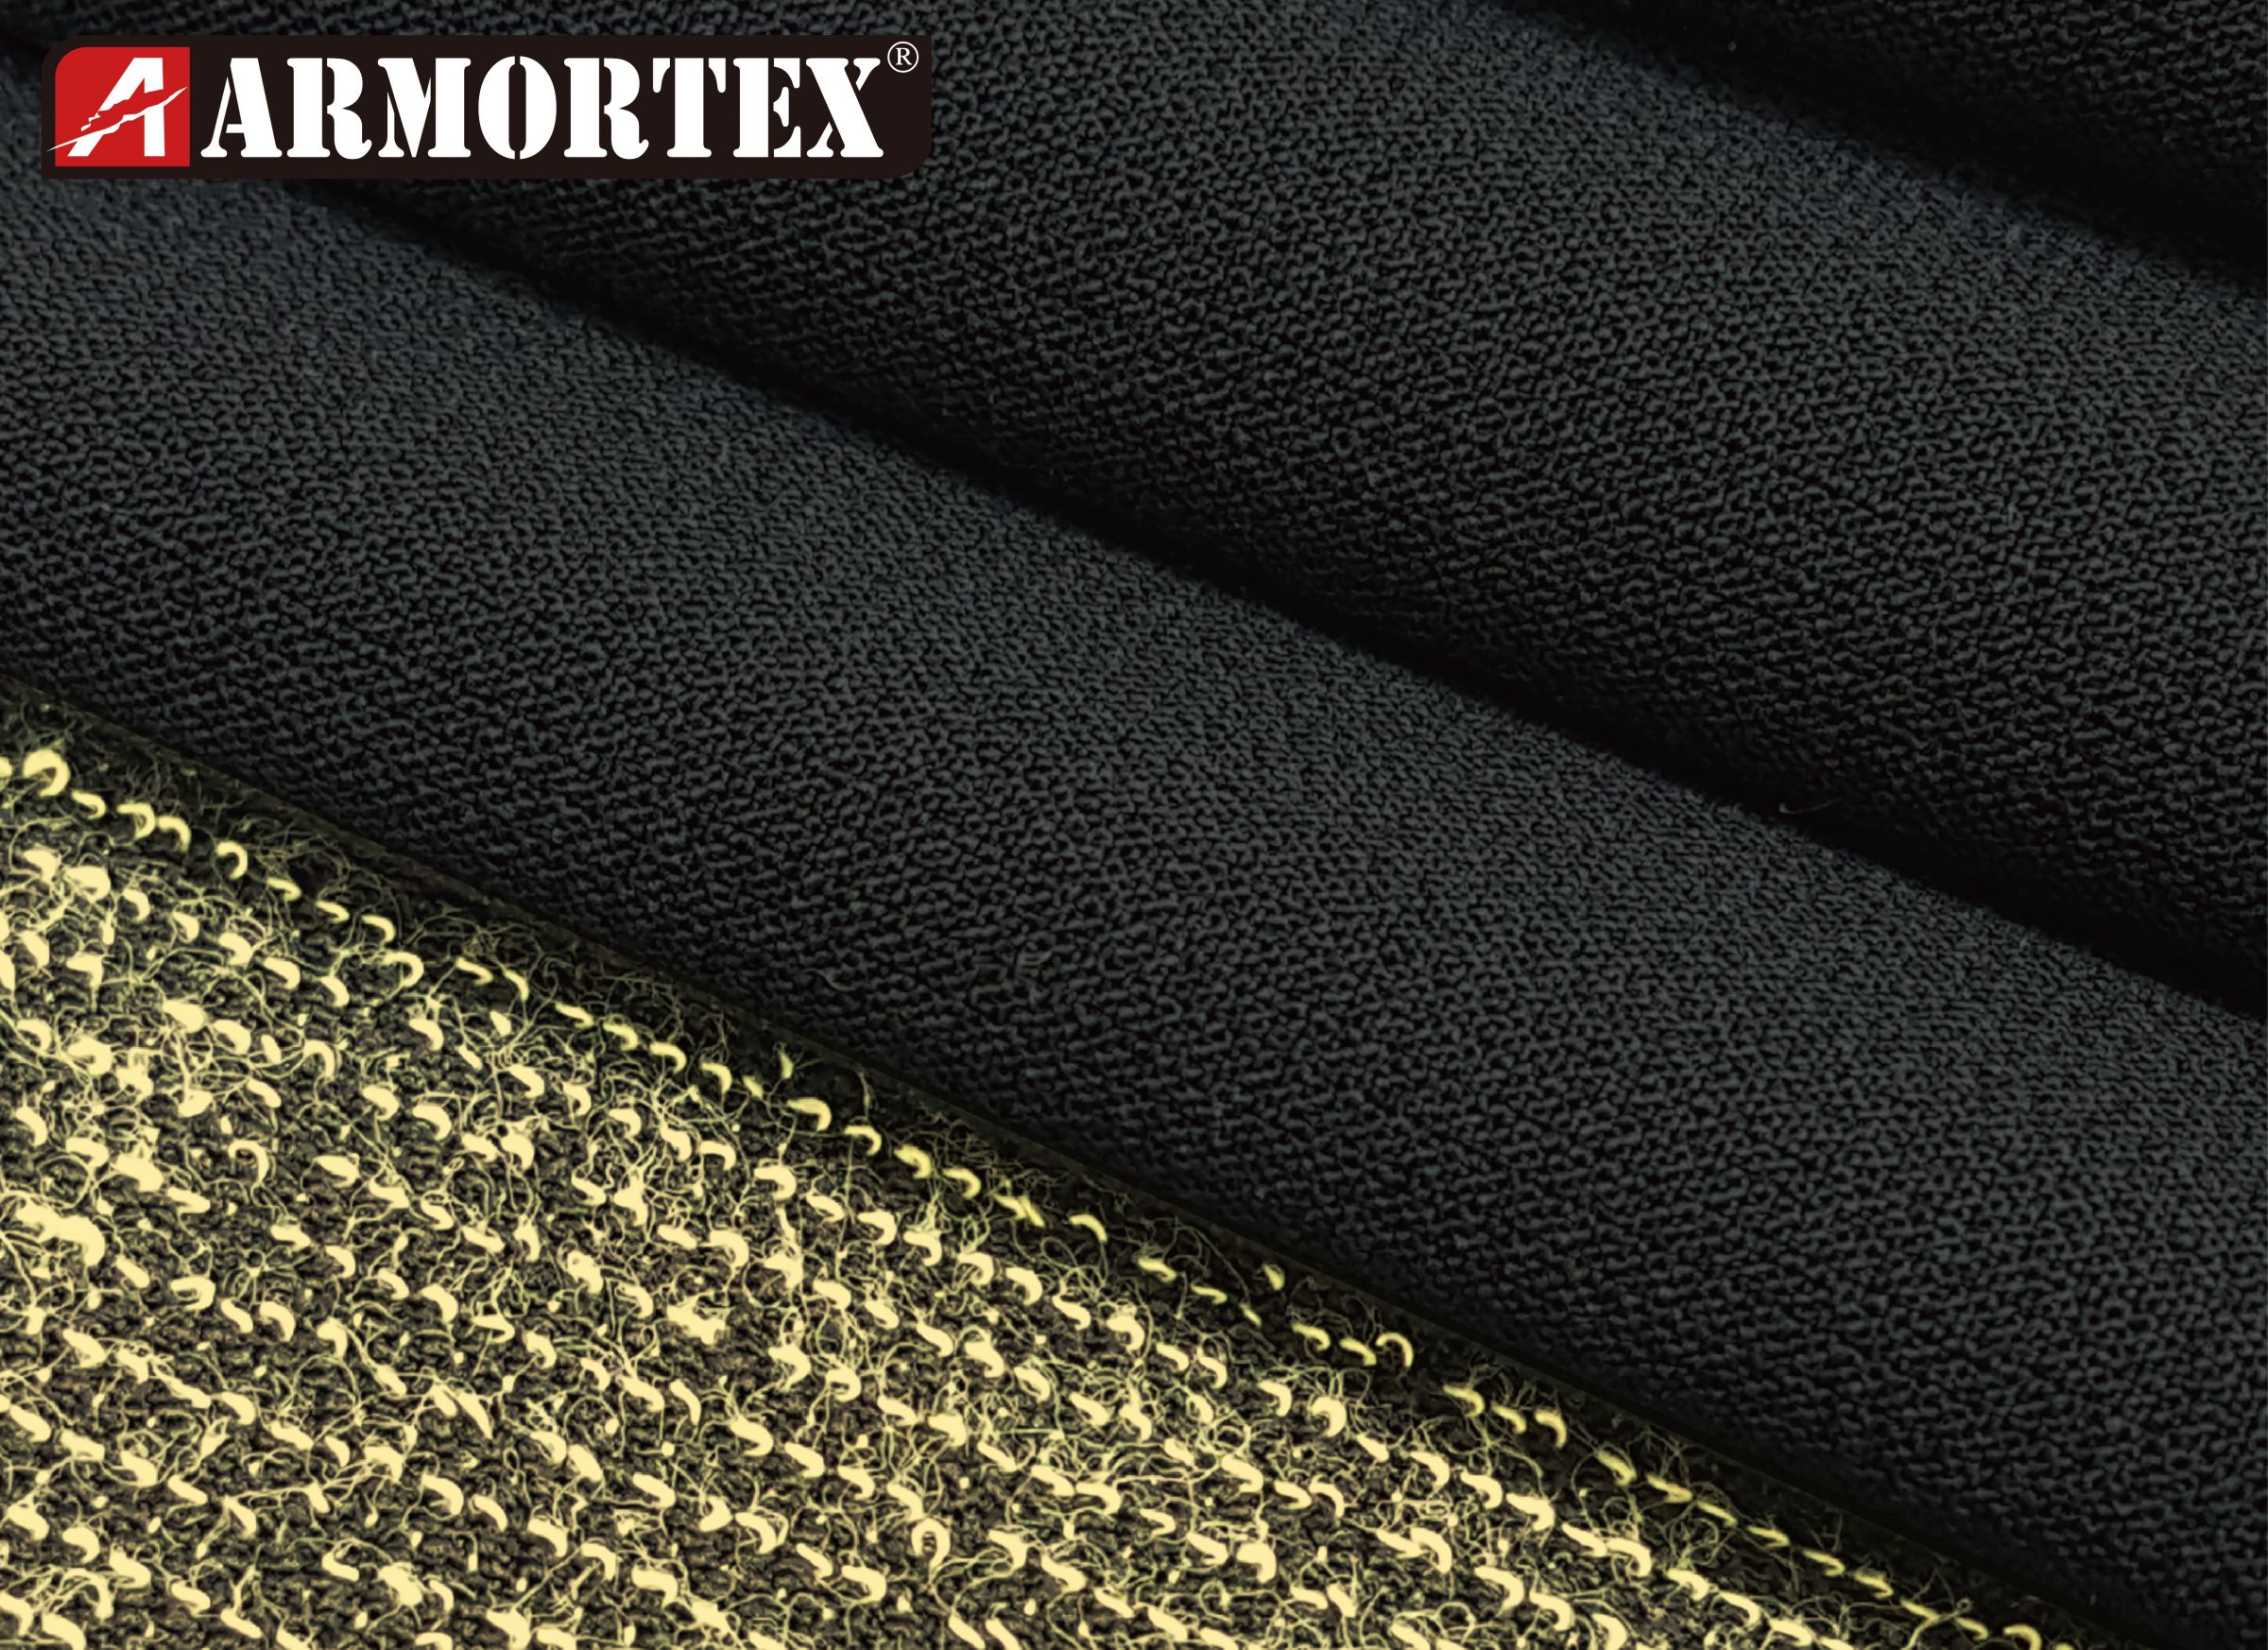 High Stretchable Abrasion Coated Resistant Fabric Made with Kevlar® Nylon -  Kevlar® Abrasion Resistant Fabric, Made in Taiwan Textile Fabric  Manufacturer with ESG Reports